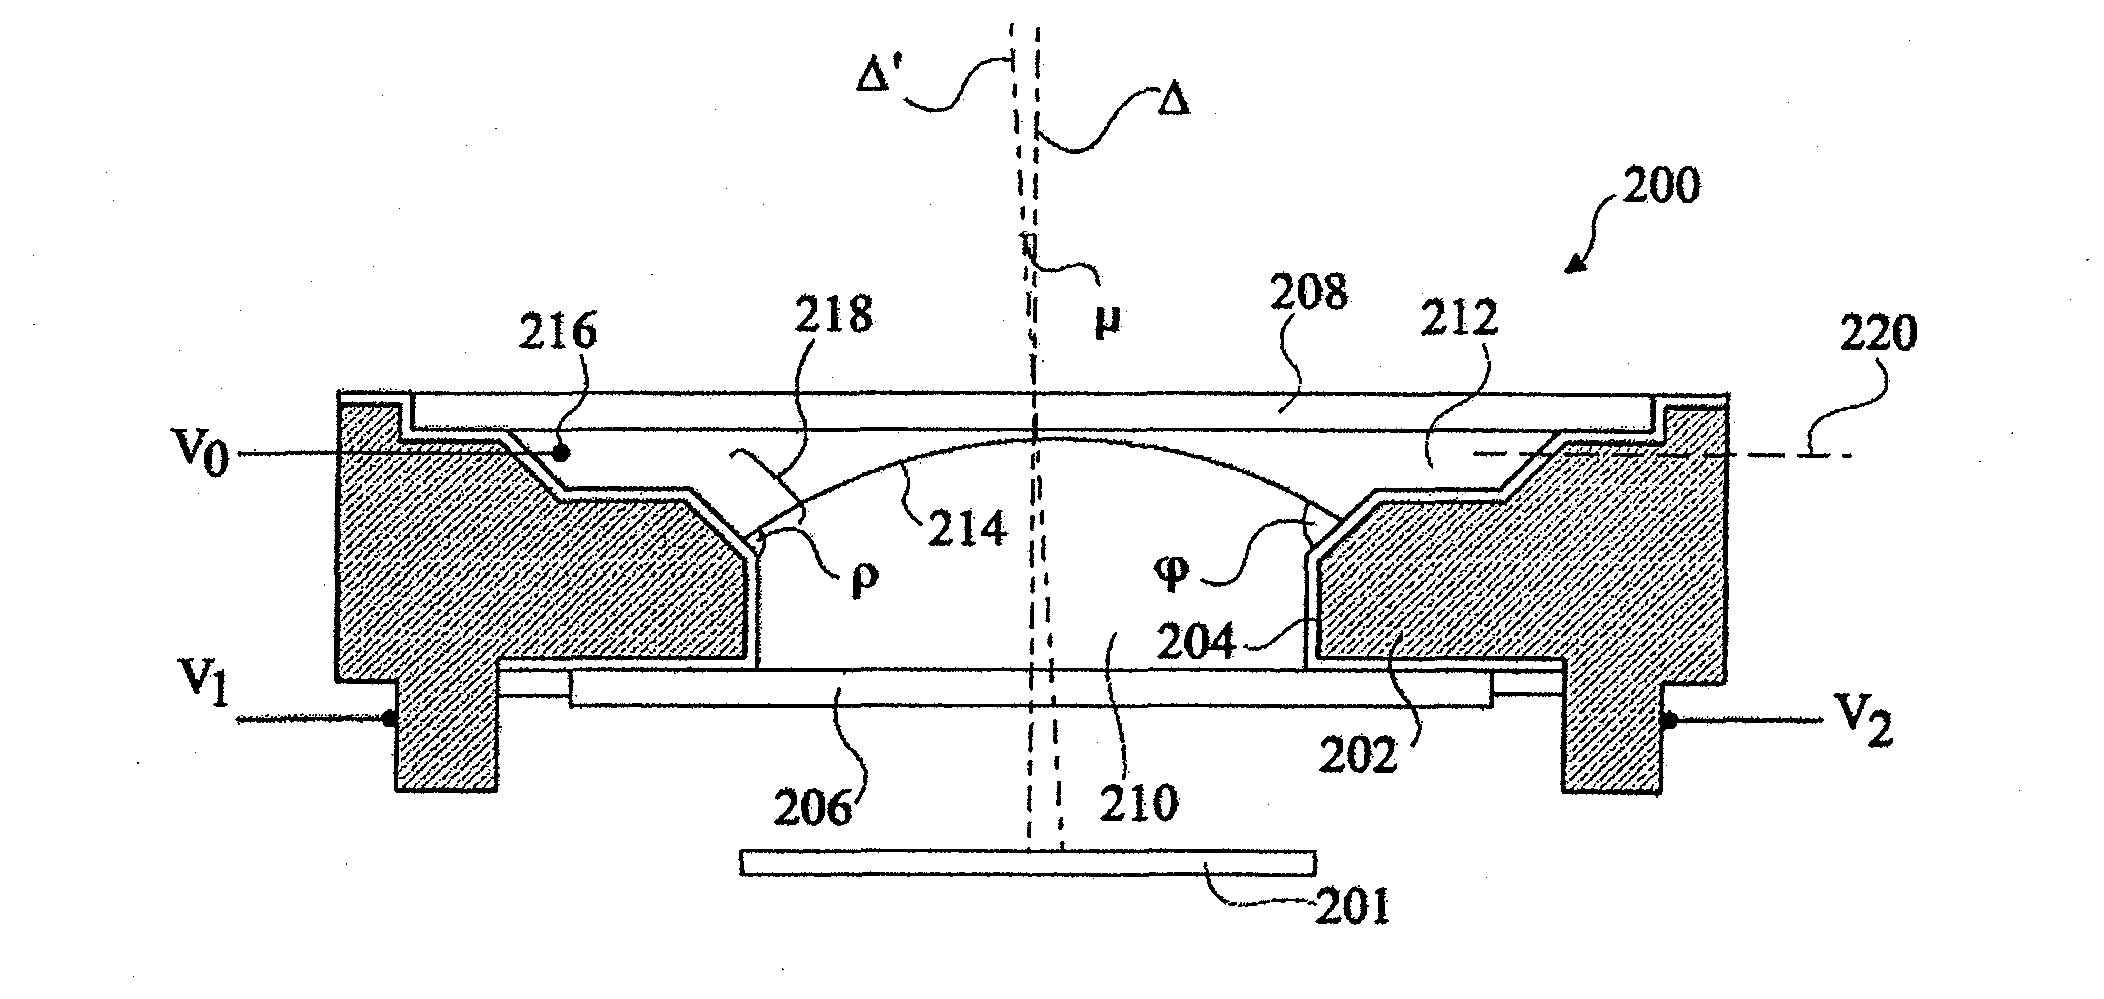 Image stabilization circuitry for liquid lens